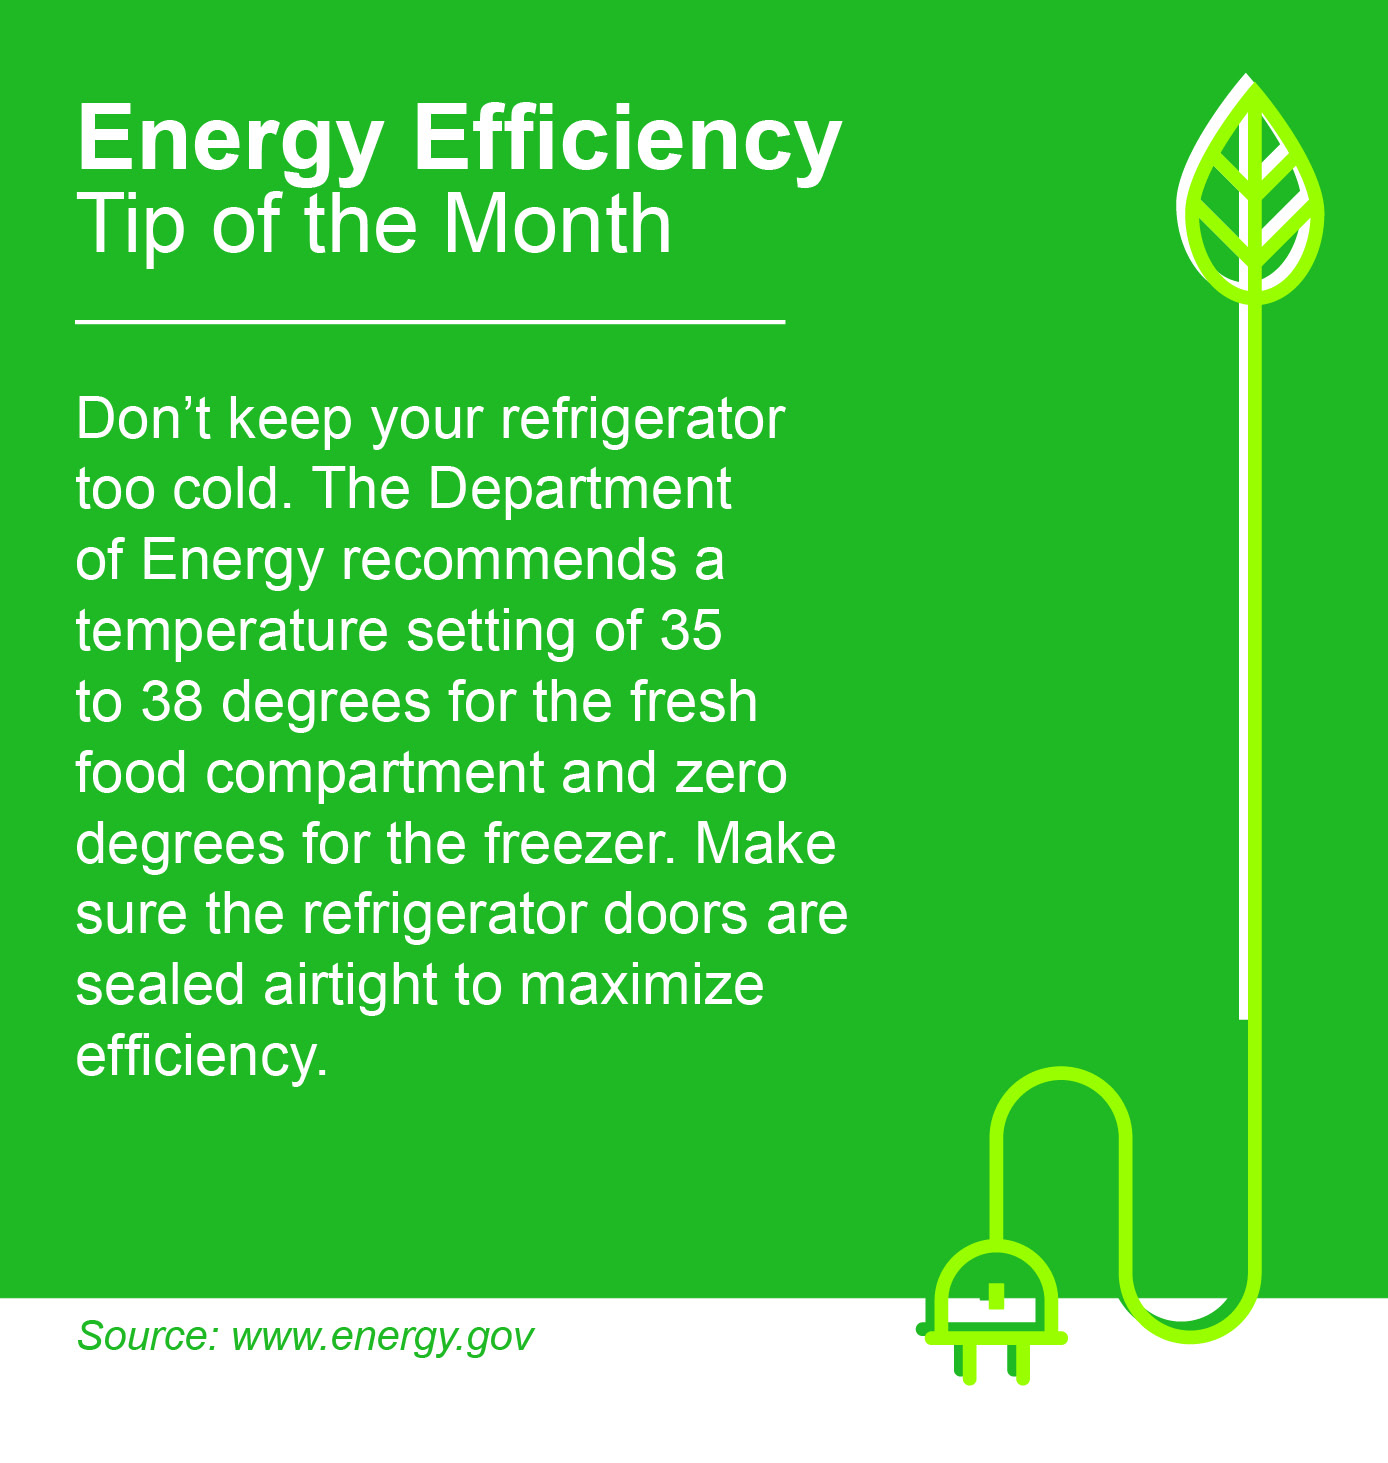 Energy Efficiency Tip of the Month: Don't keep your refrigerator too cold. The Department of Energy recommends a temperature setting of 35 to 38 degrees for the fresh food compartment and zero degrees for the freezer. Make sure the refrigerator doors are sealed airtight to maximize efficiency.